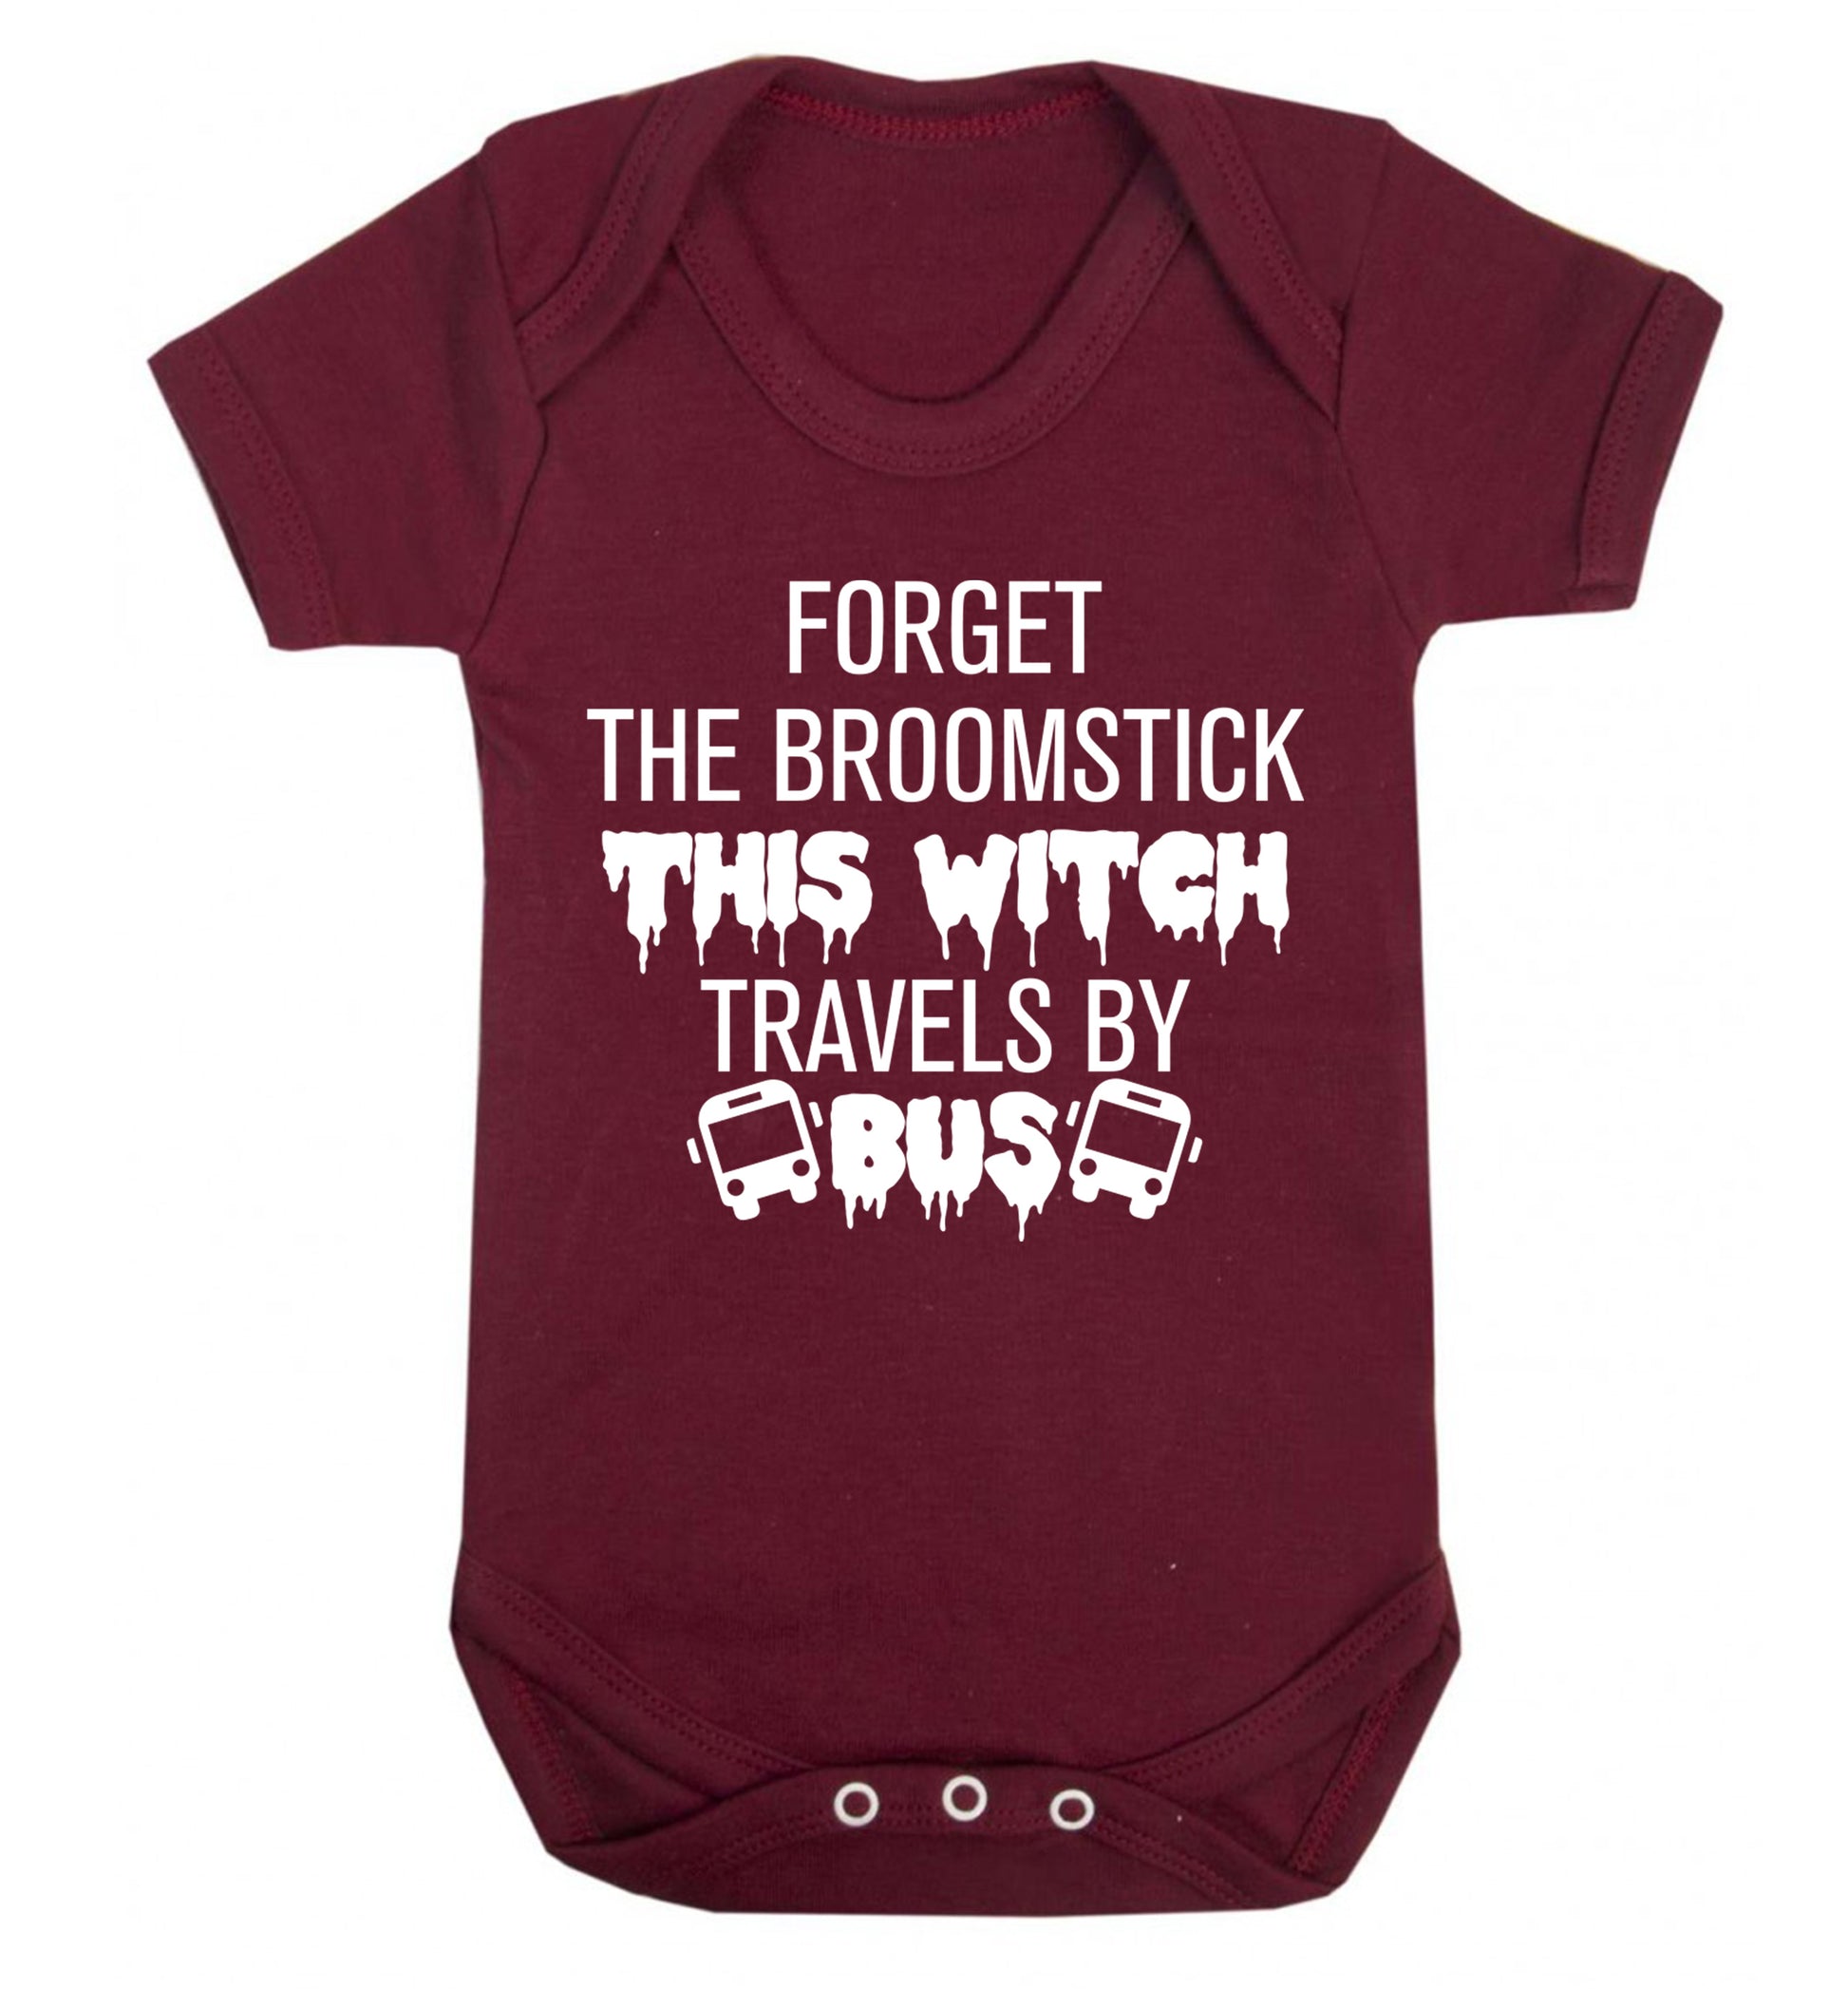 Forget the broomstick this witch travels by bus Baby Vest maroon 18-24 months